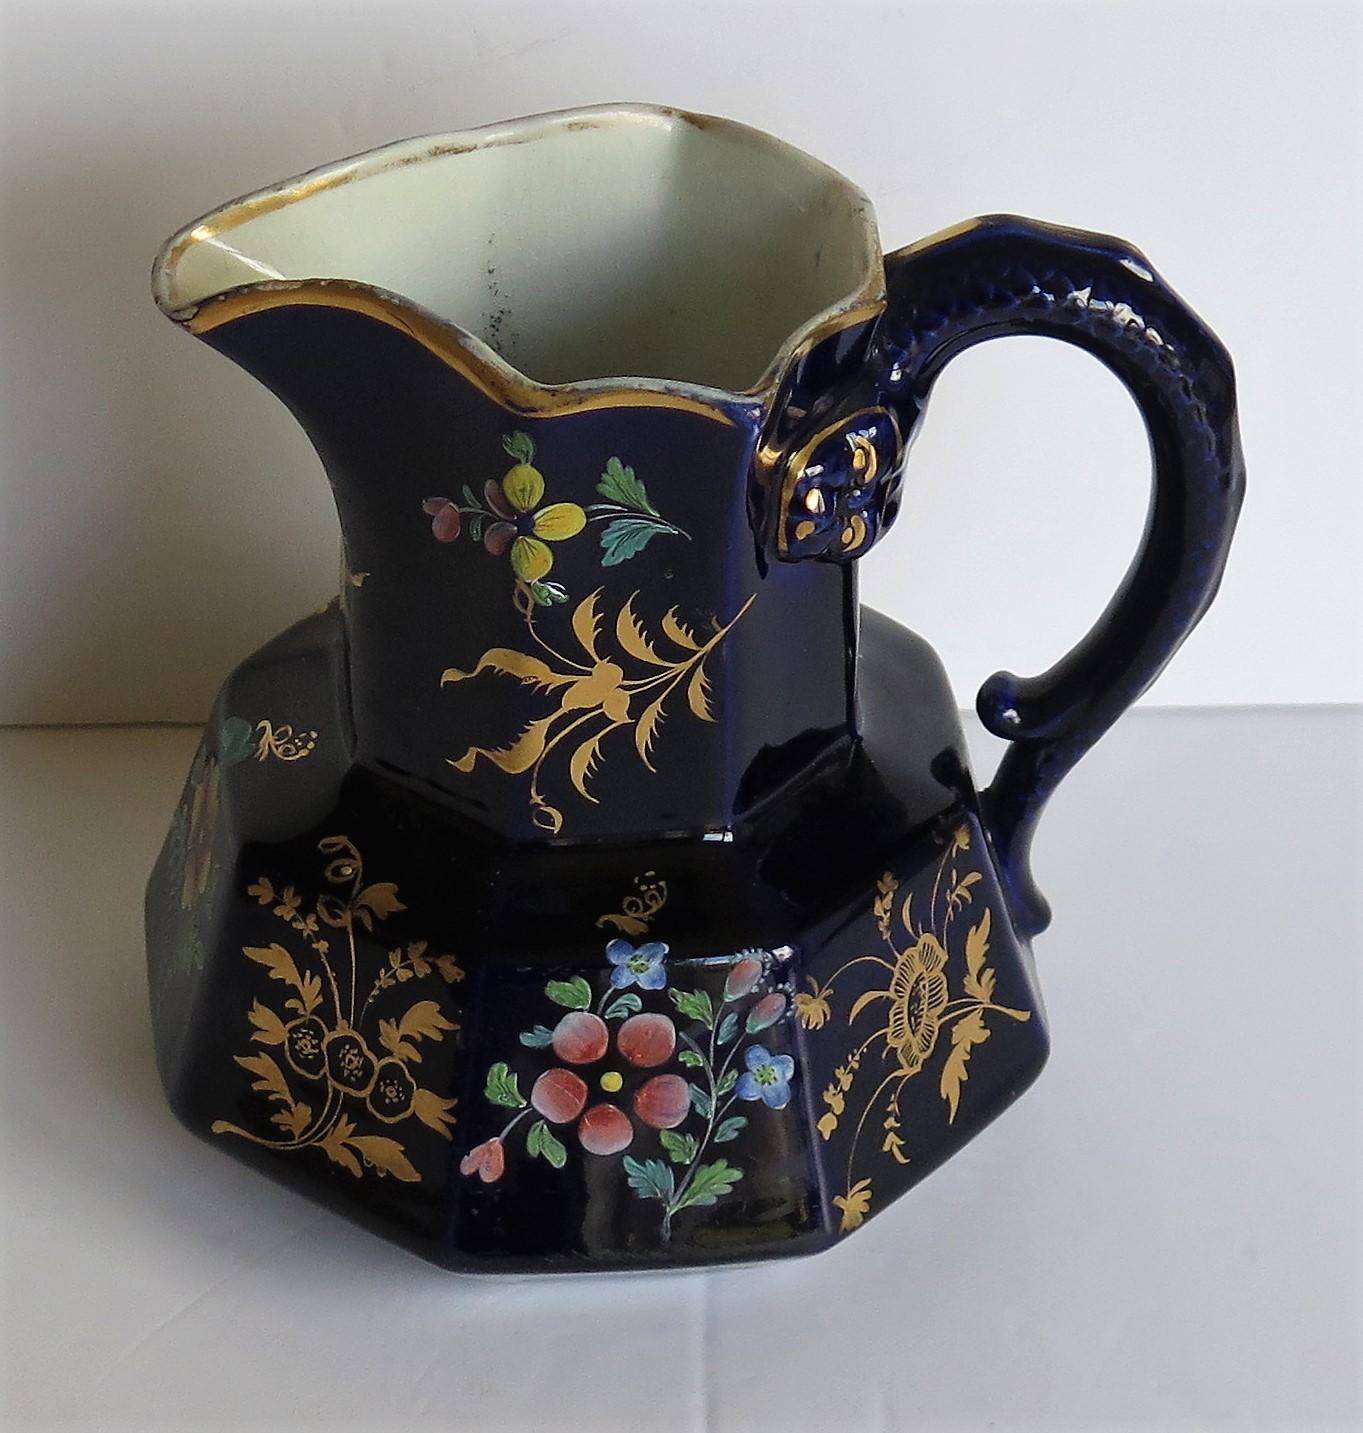 Rare Early 19th Century Ironstone Jug or Pitcher, Zachariah Boyle Hand Enamelled 4